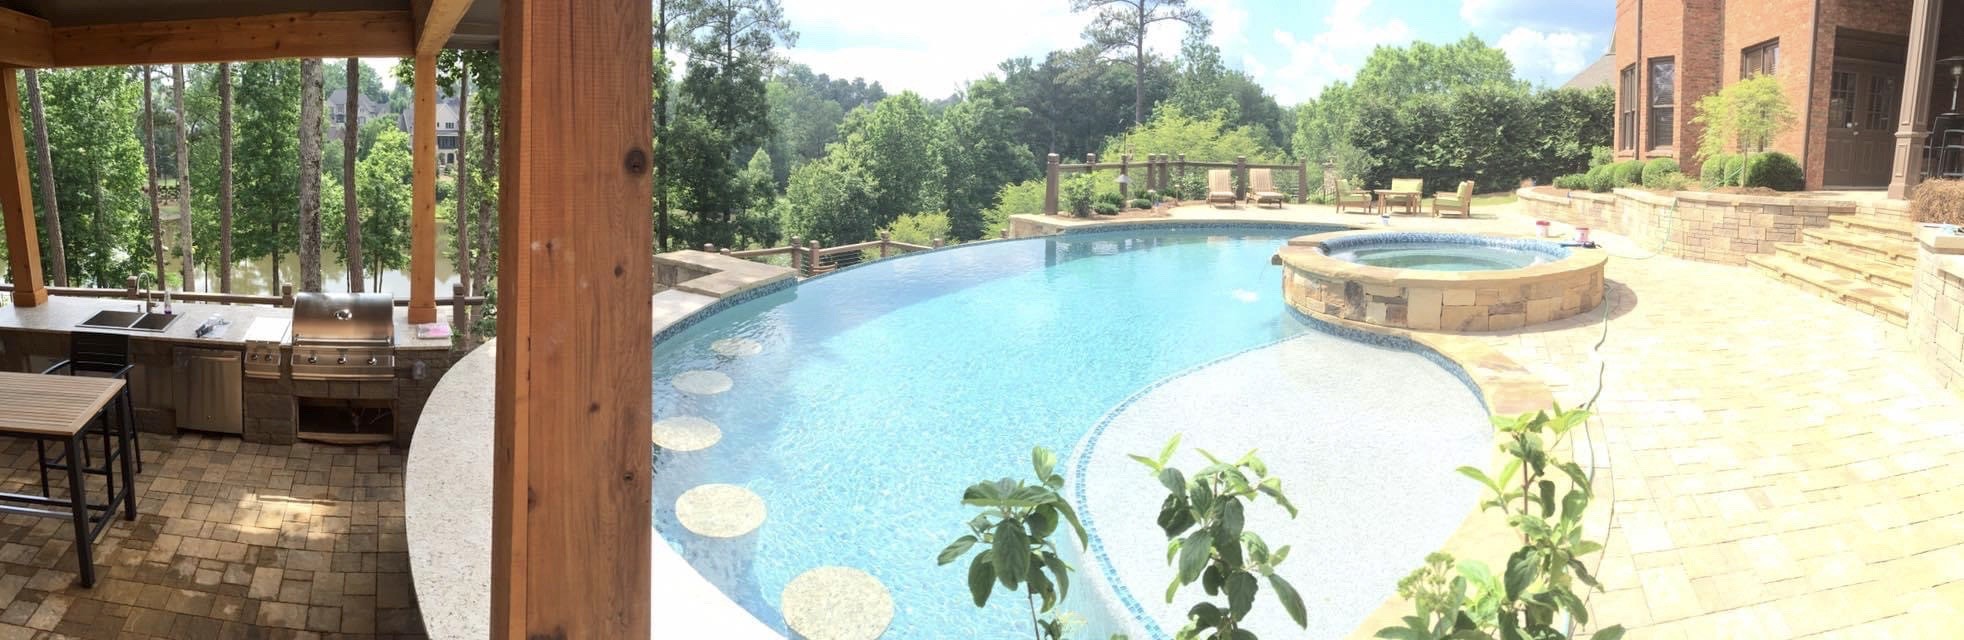 Pool with Swim Up Bar and Patio by Sugar Hill Outdoors